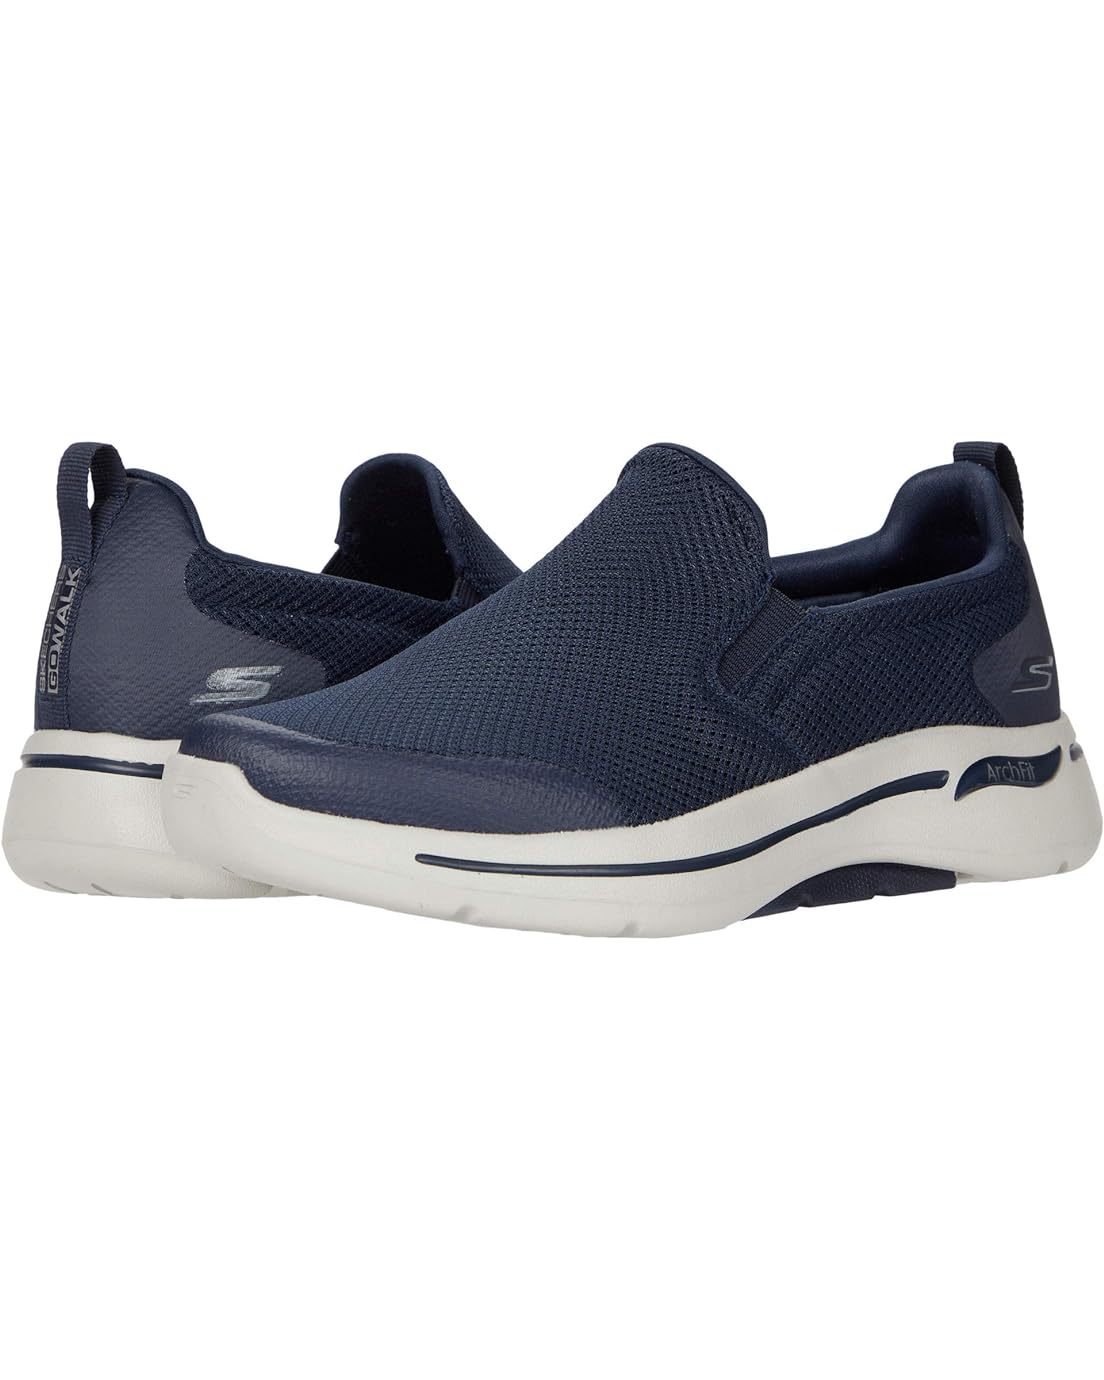 SKECHERS Performance Go Walk Arch Fit - Togpath